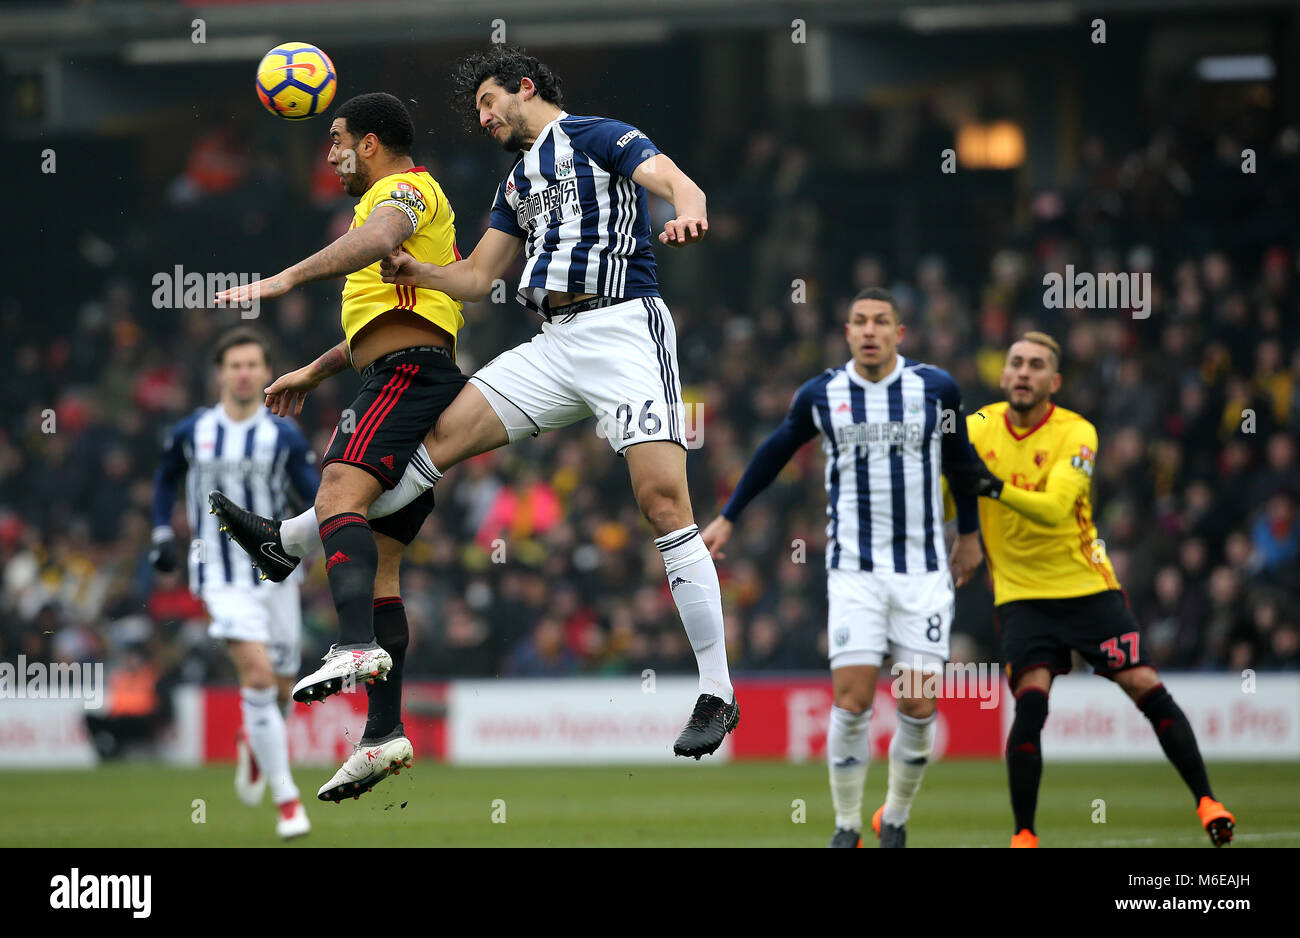 West Bromwich Albion's Ahmed Hegazy (right) wins a header against Watford's Troy Deeney during the Premier League match at Vicarage Road, Watford. Stock Photo